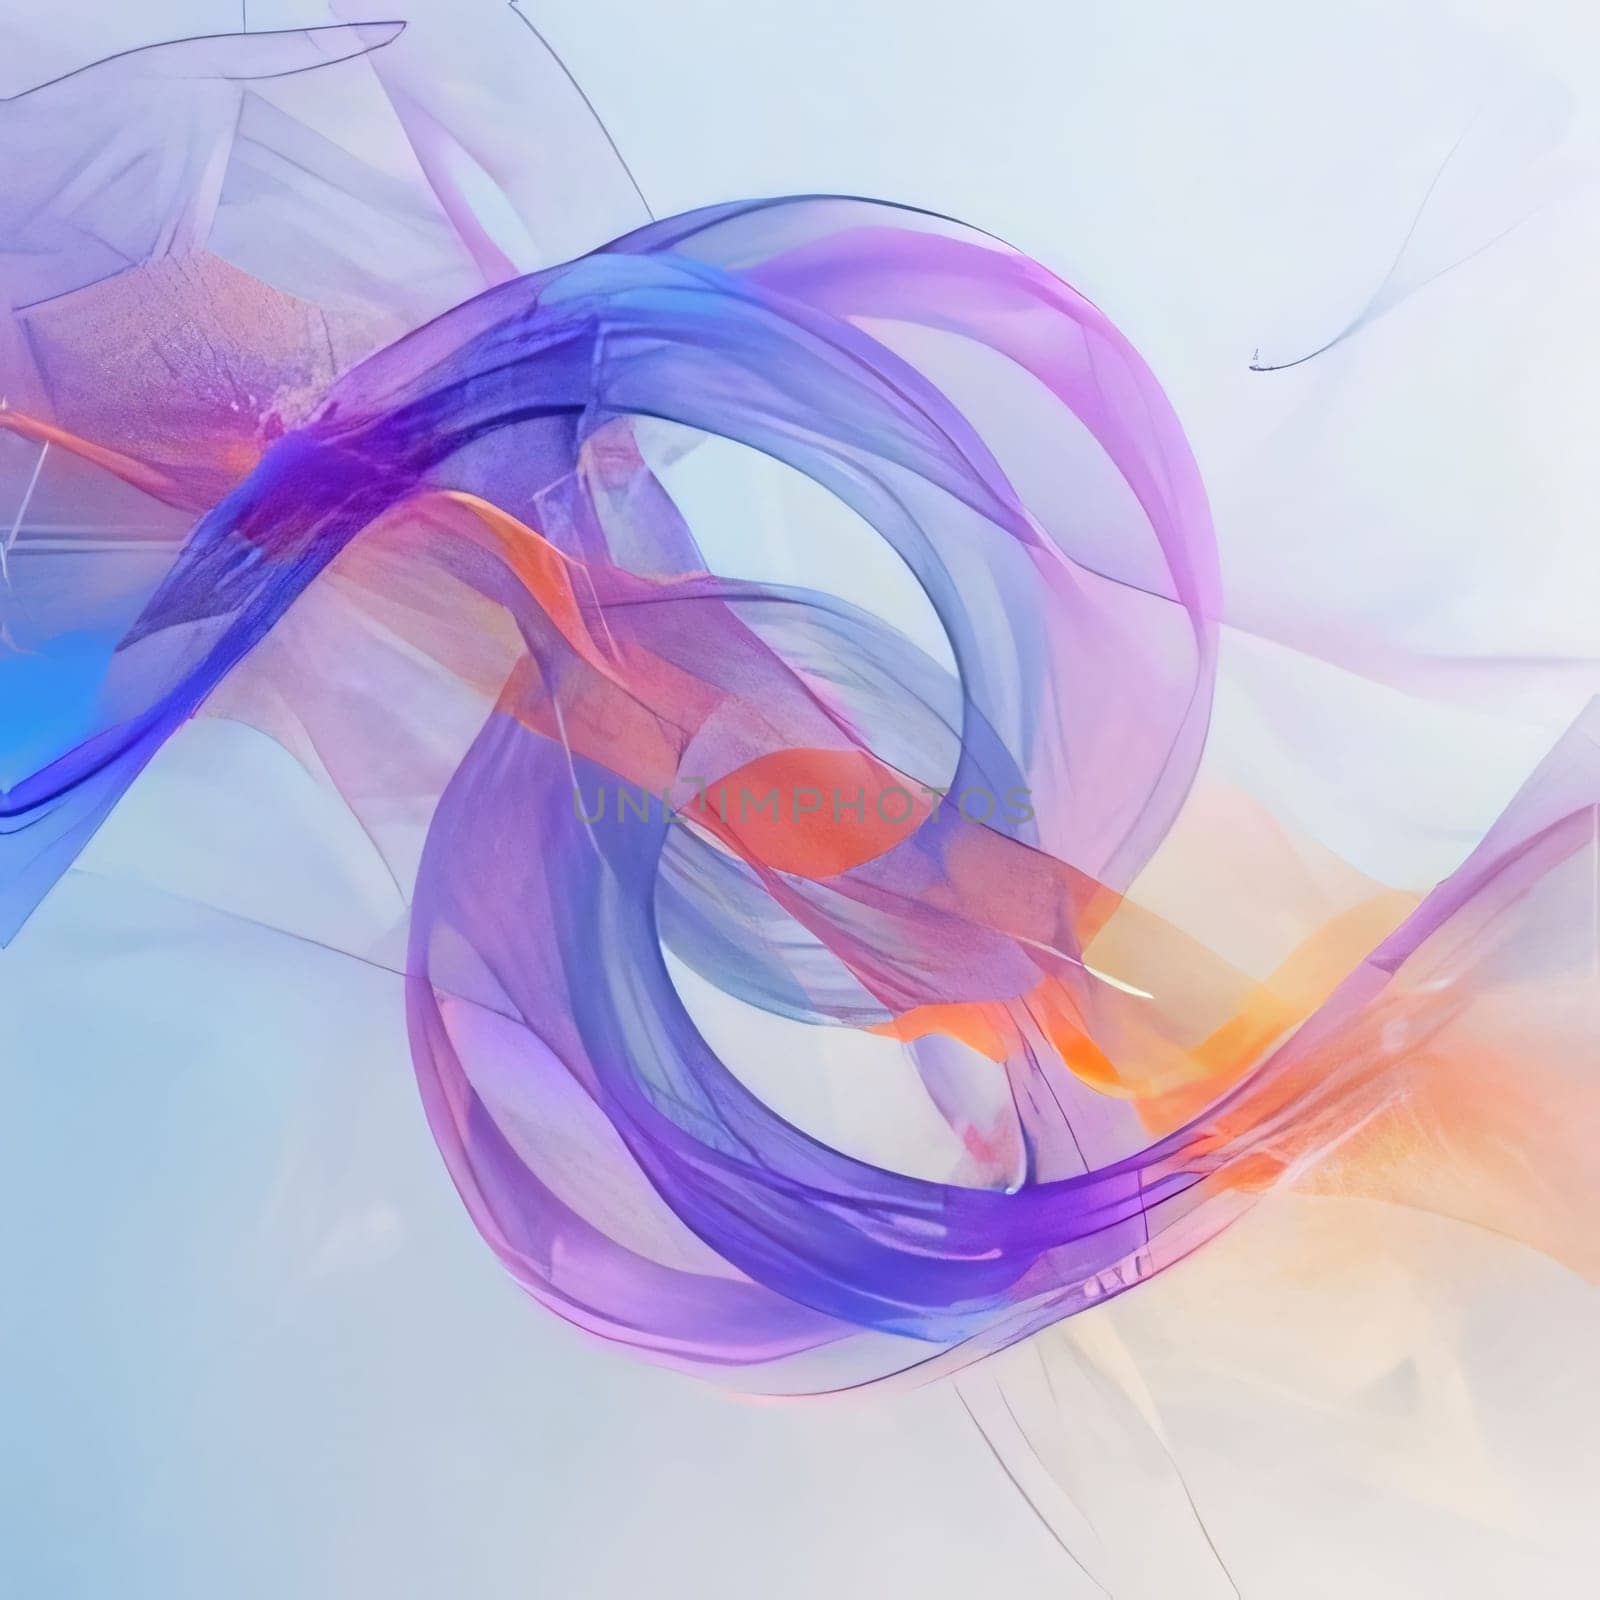 Abstract background design: abstract background with blue and orange ribbons on a white background